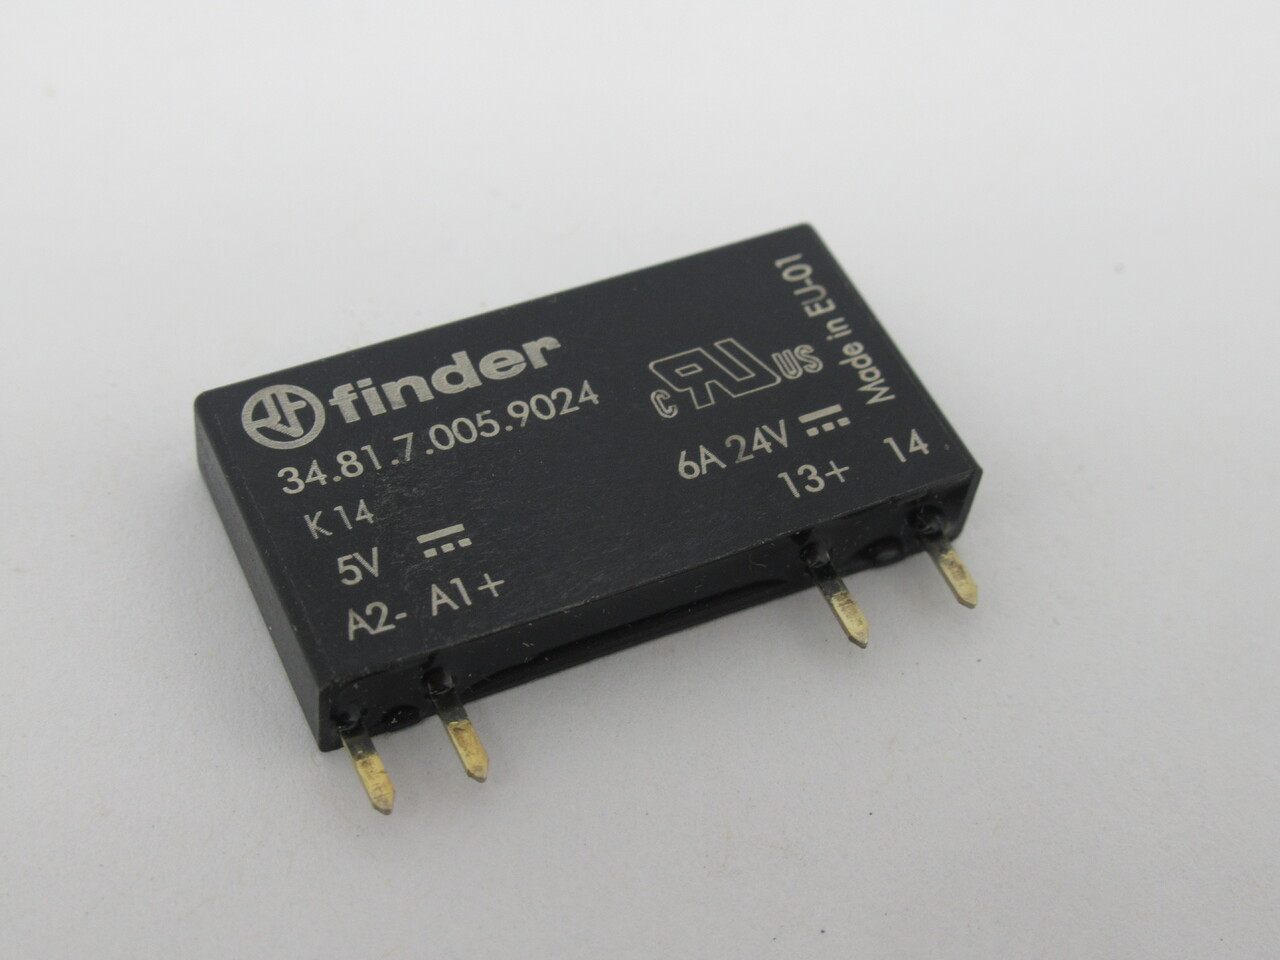 Finder 34.81.7.005.9024 Solid State Relay PCB/Plug In Connection 6Amp USED